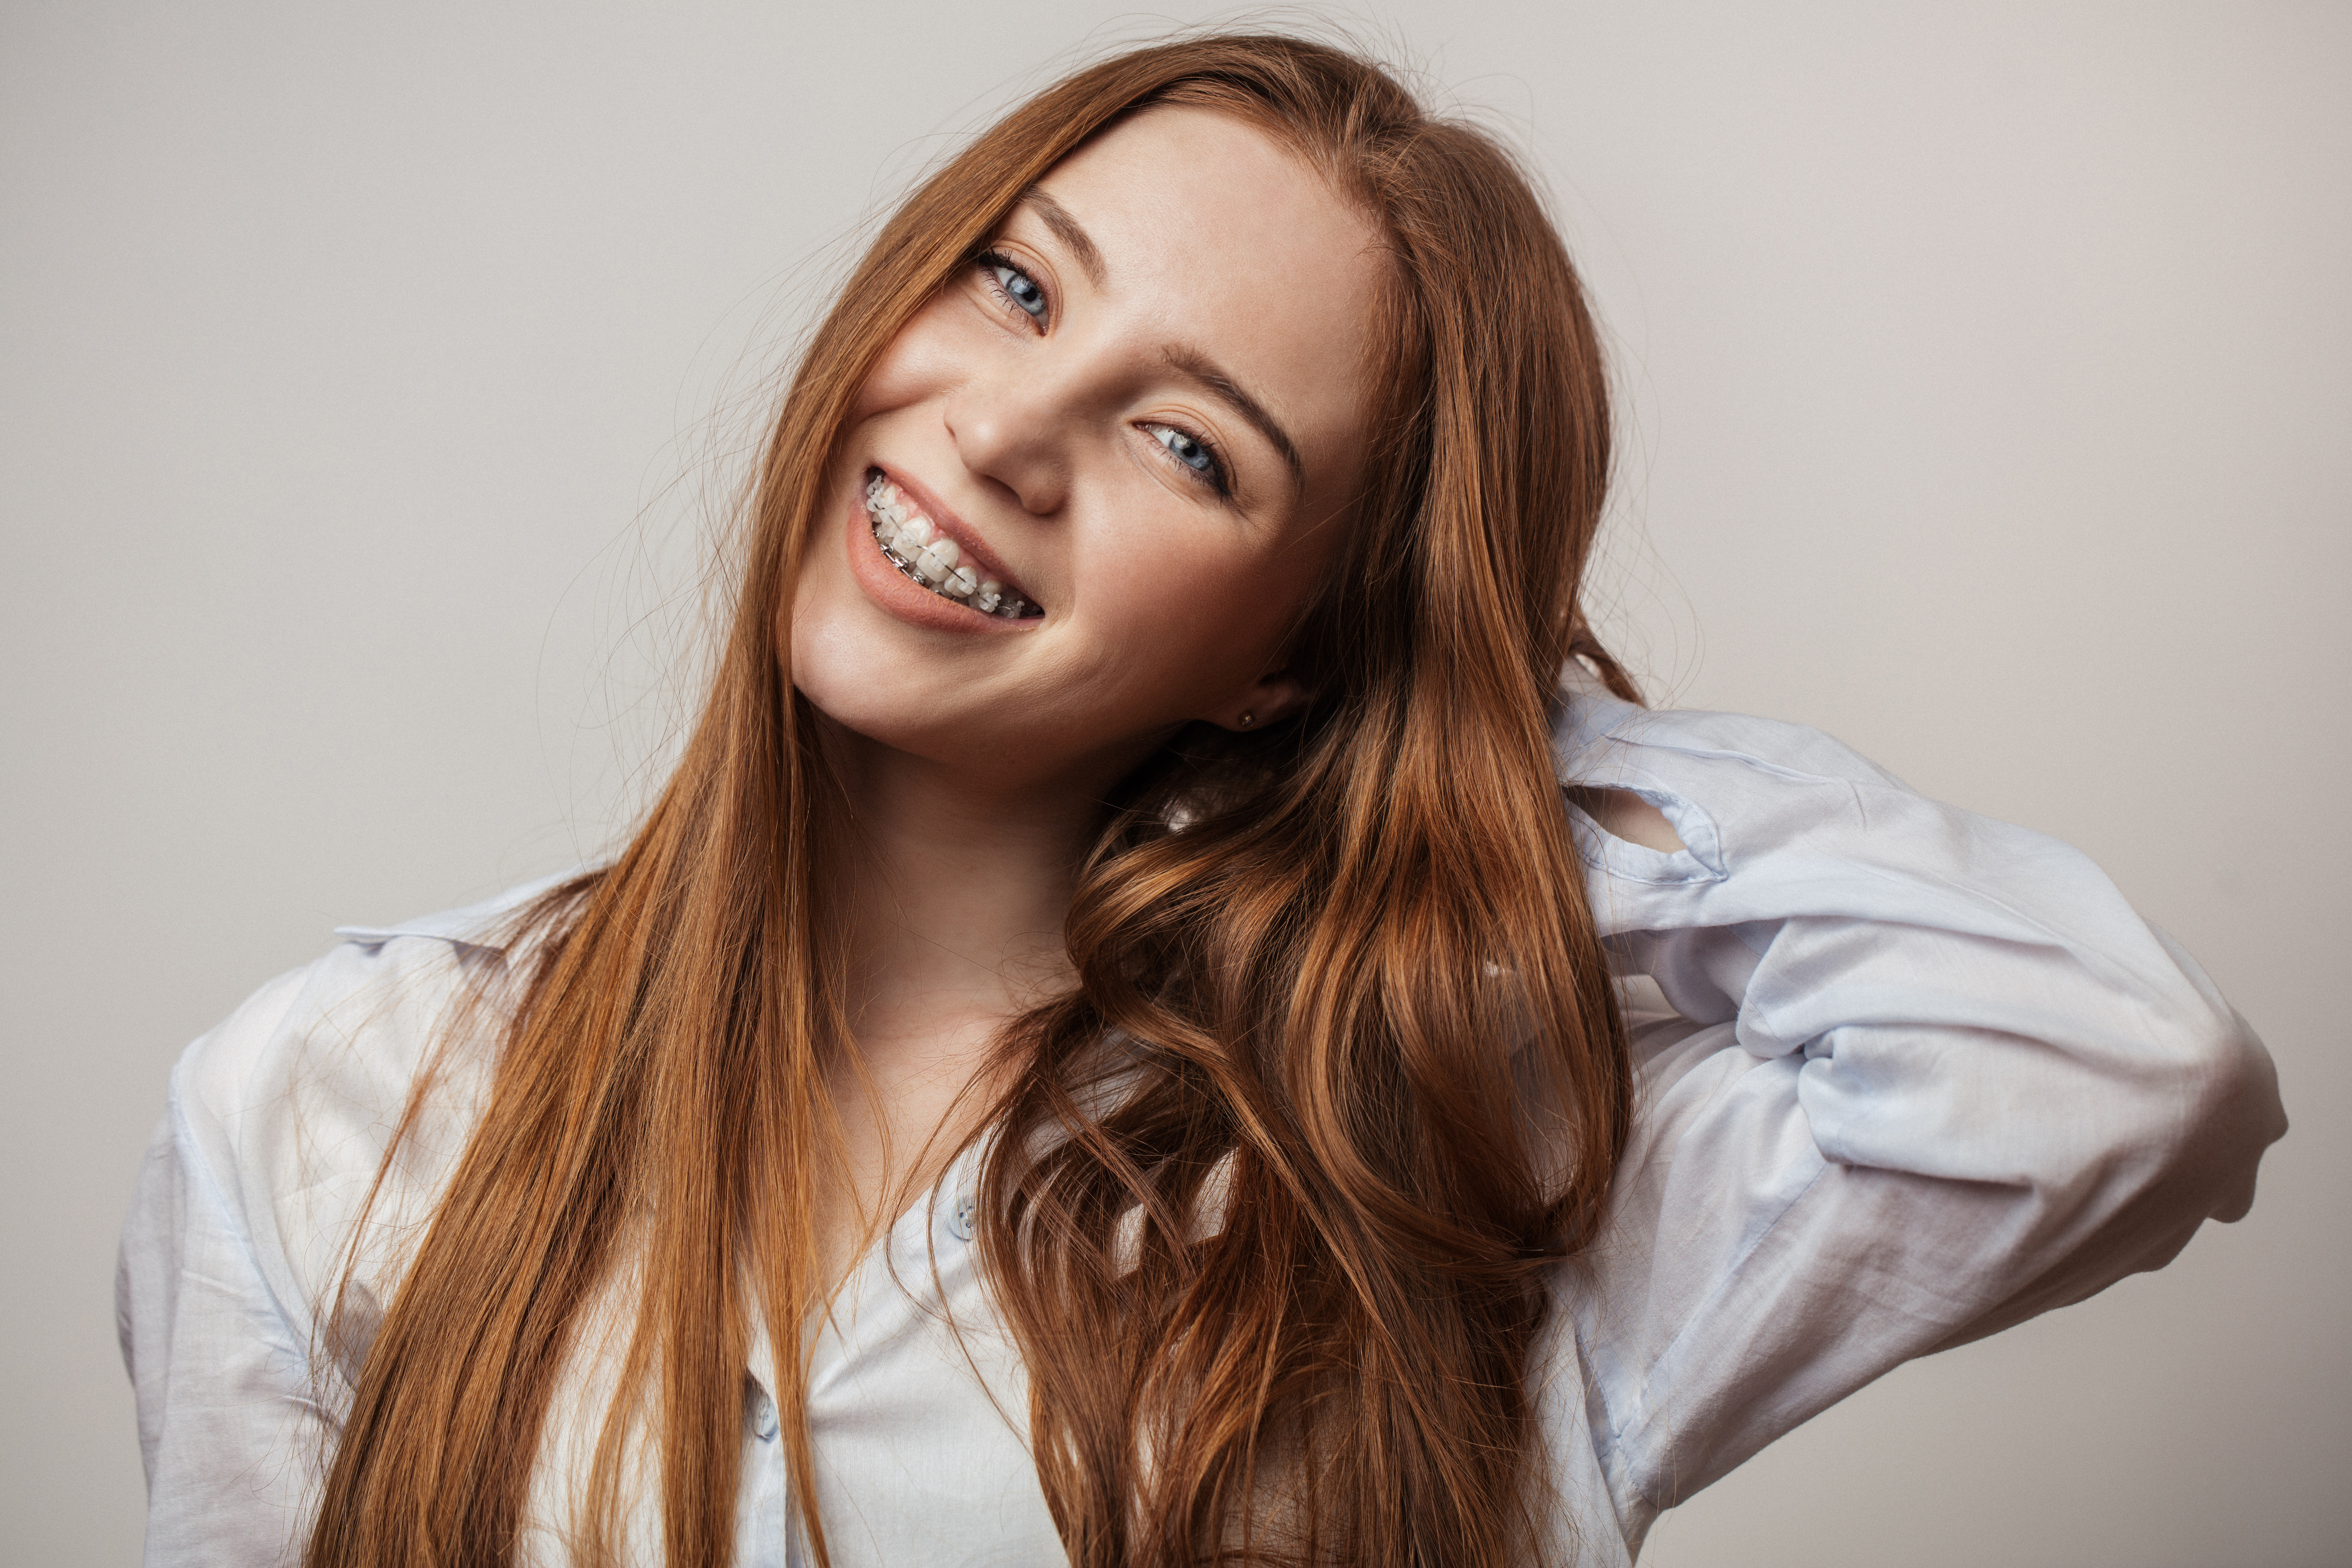 Ceramic Braces: A Discreet Path to a Confident Smile at Creekside Orthodontics